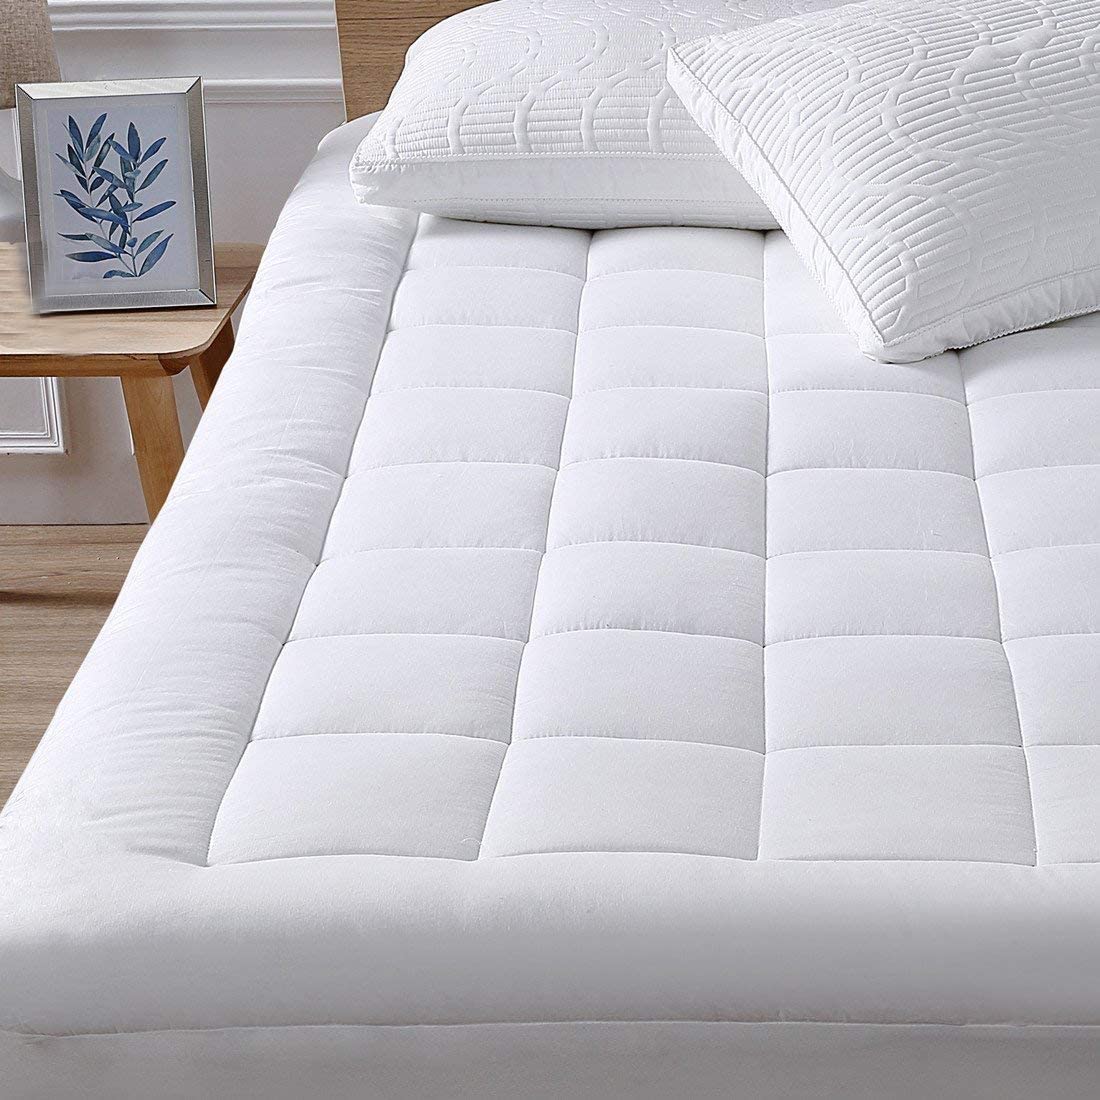 oaskys King Mattress Pad Cover Cooling Mattress Topper Cotton Top ...